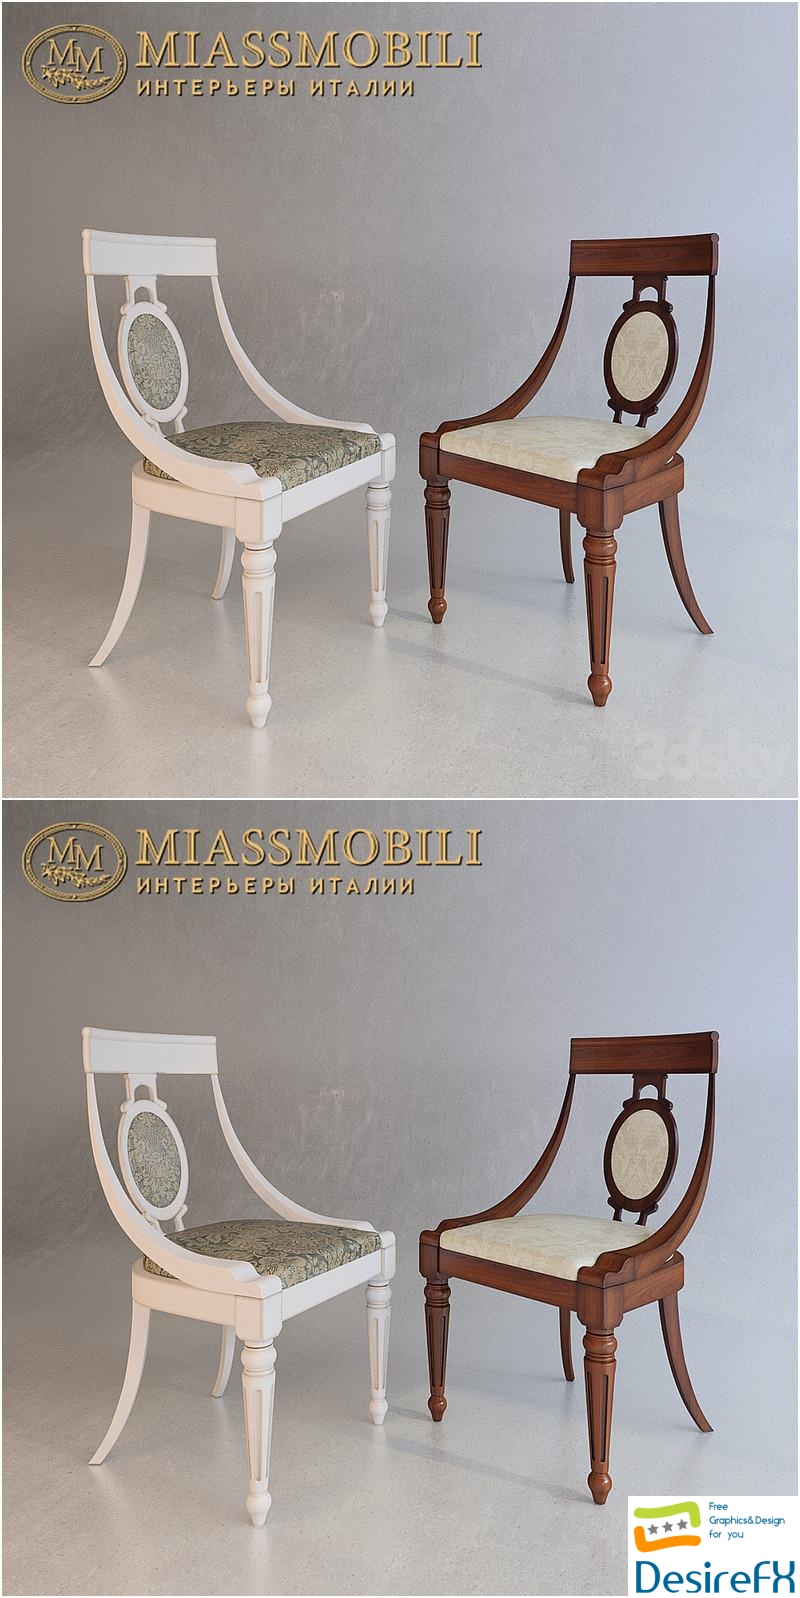 Floriana chairs from Miassmobili 3D Model